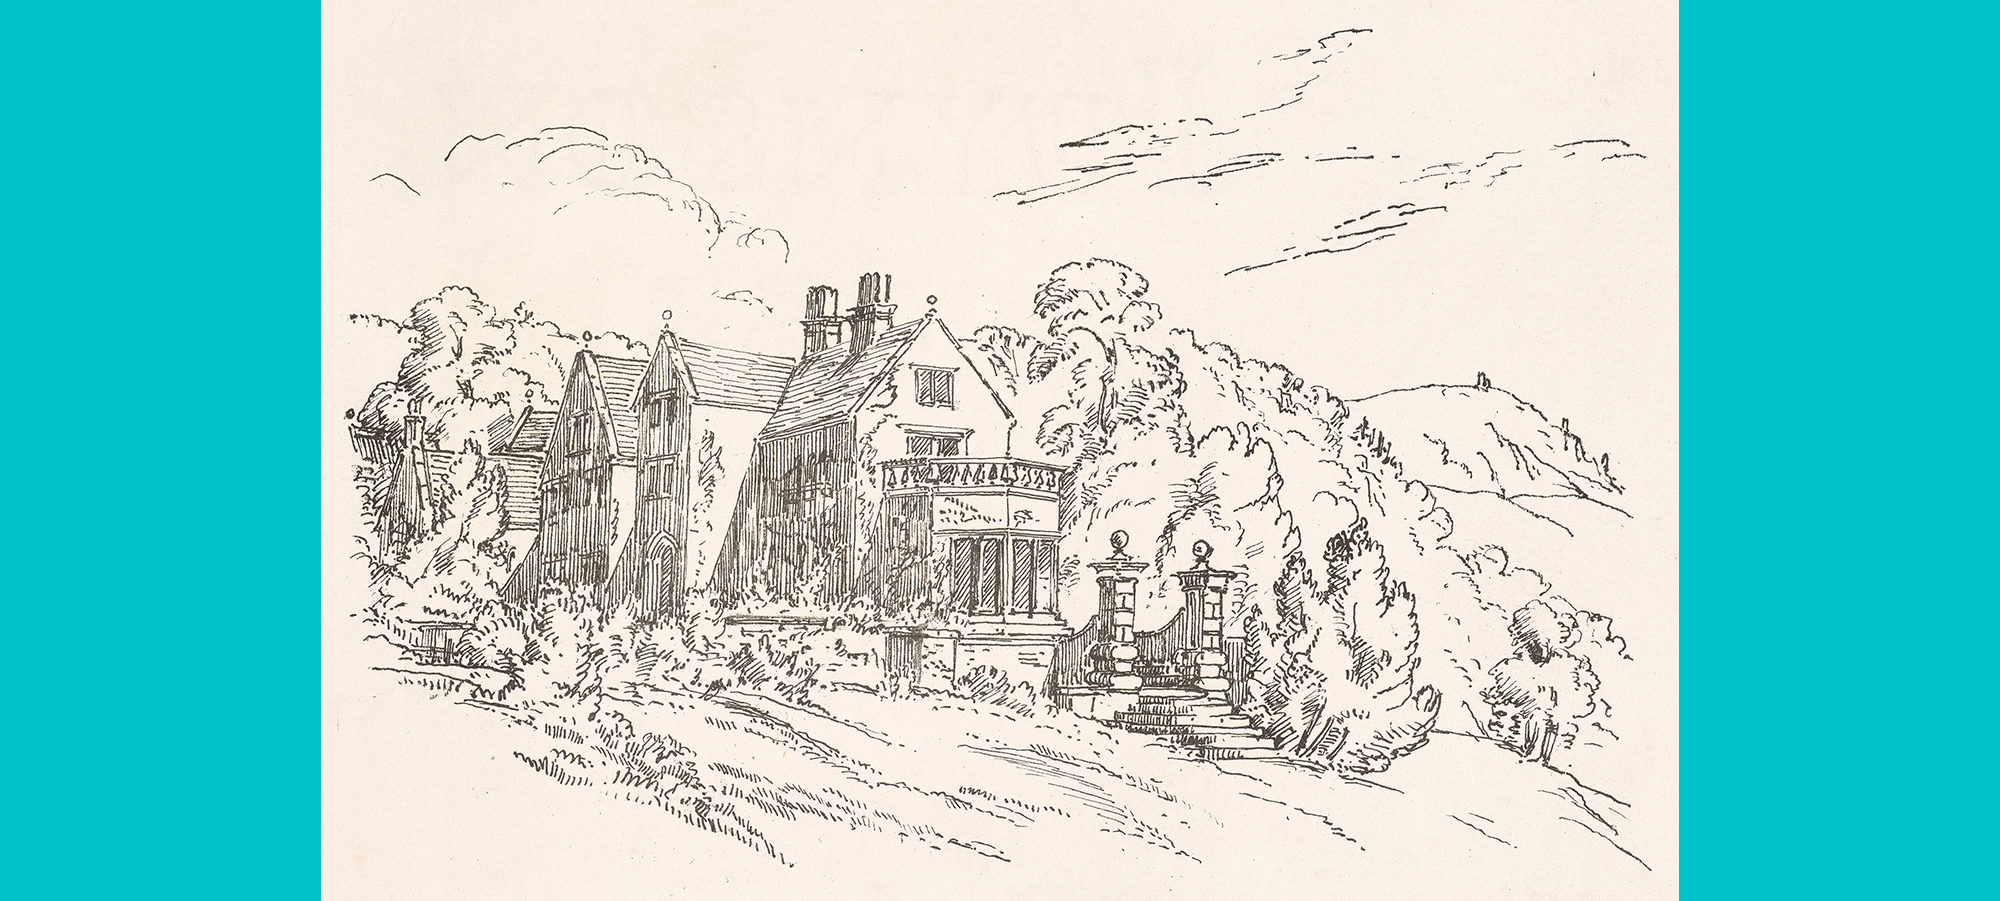 Print sketch of a house with surrounding trees